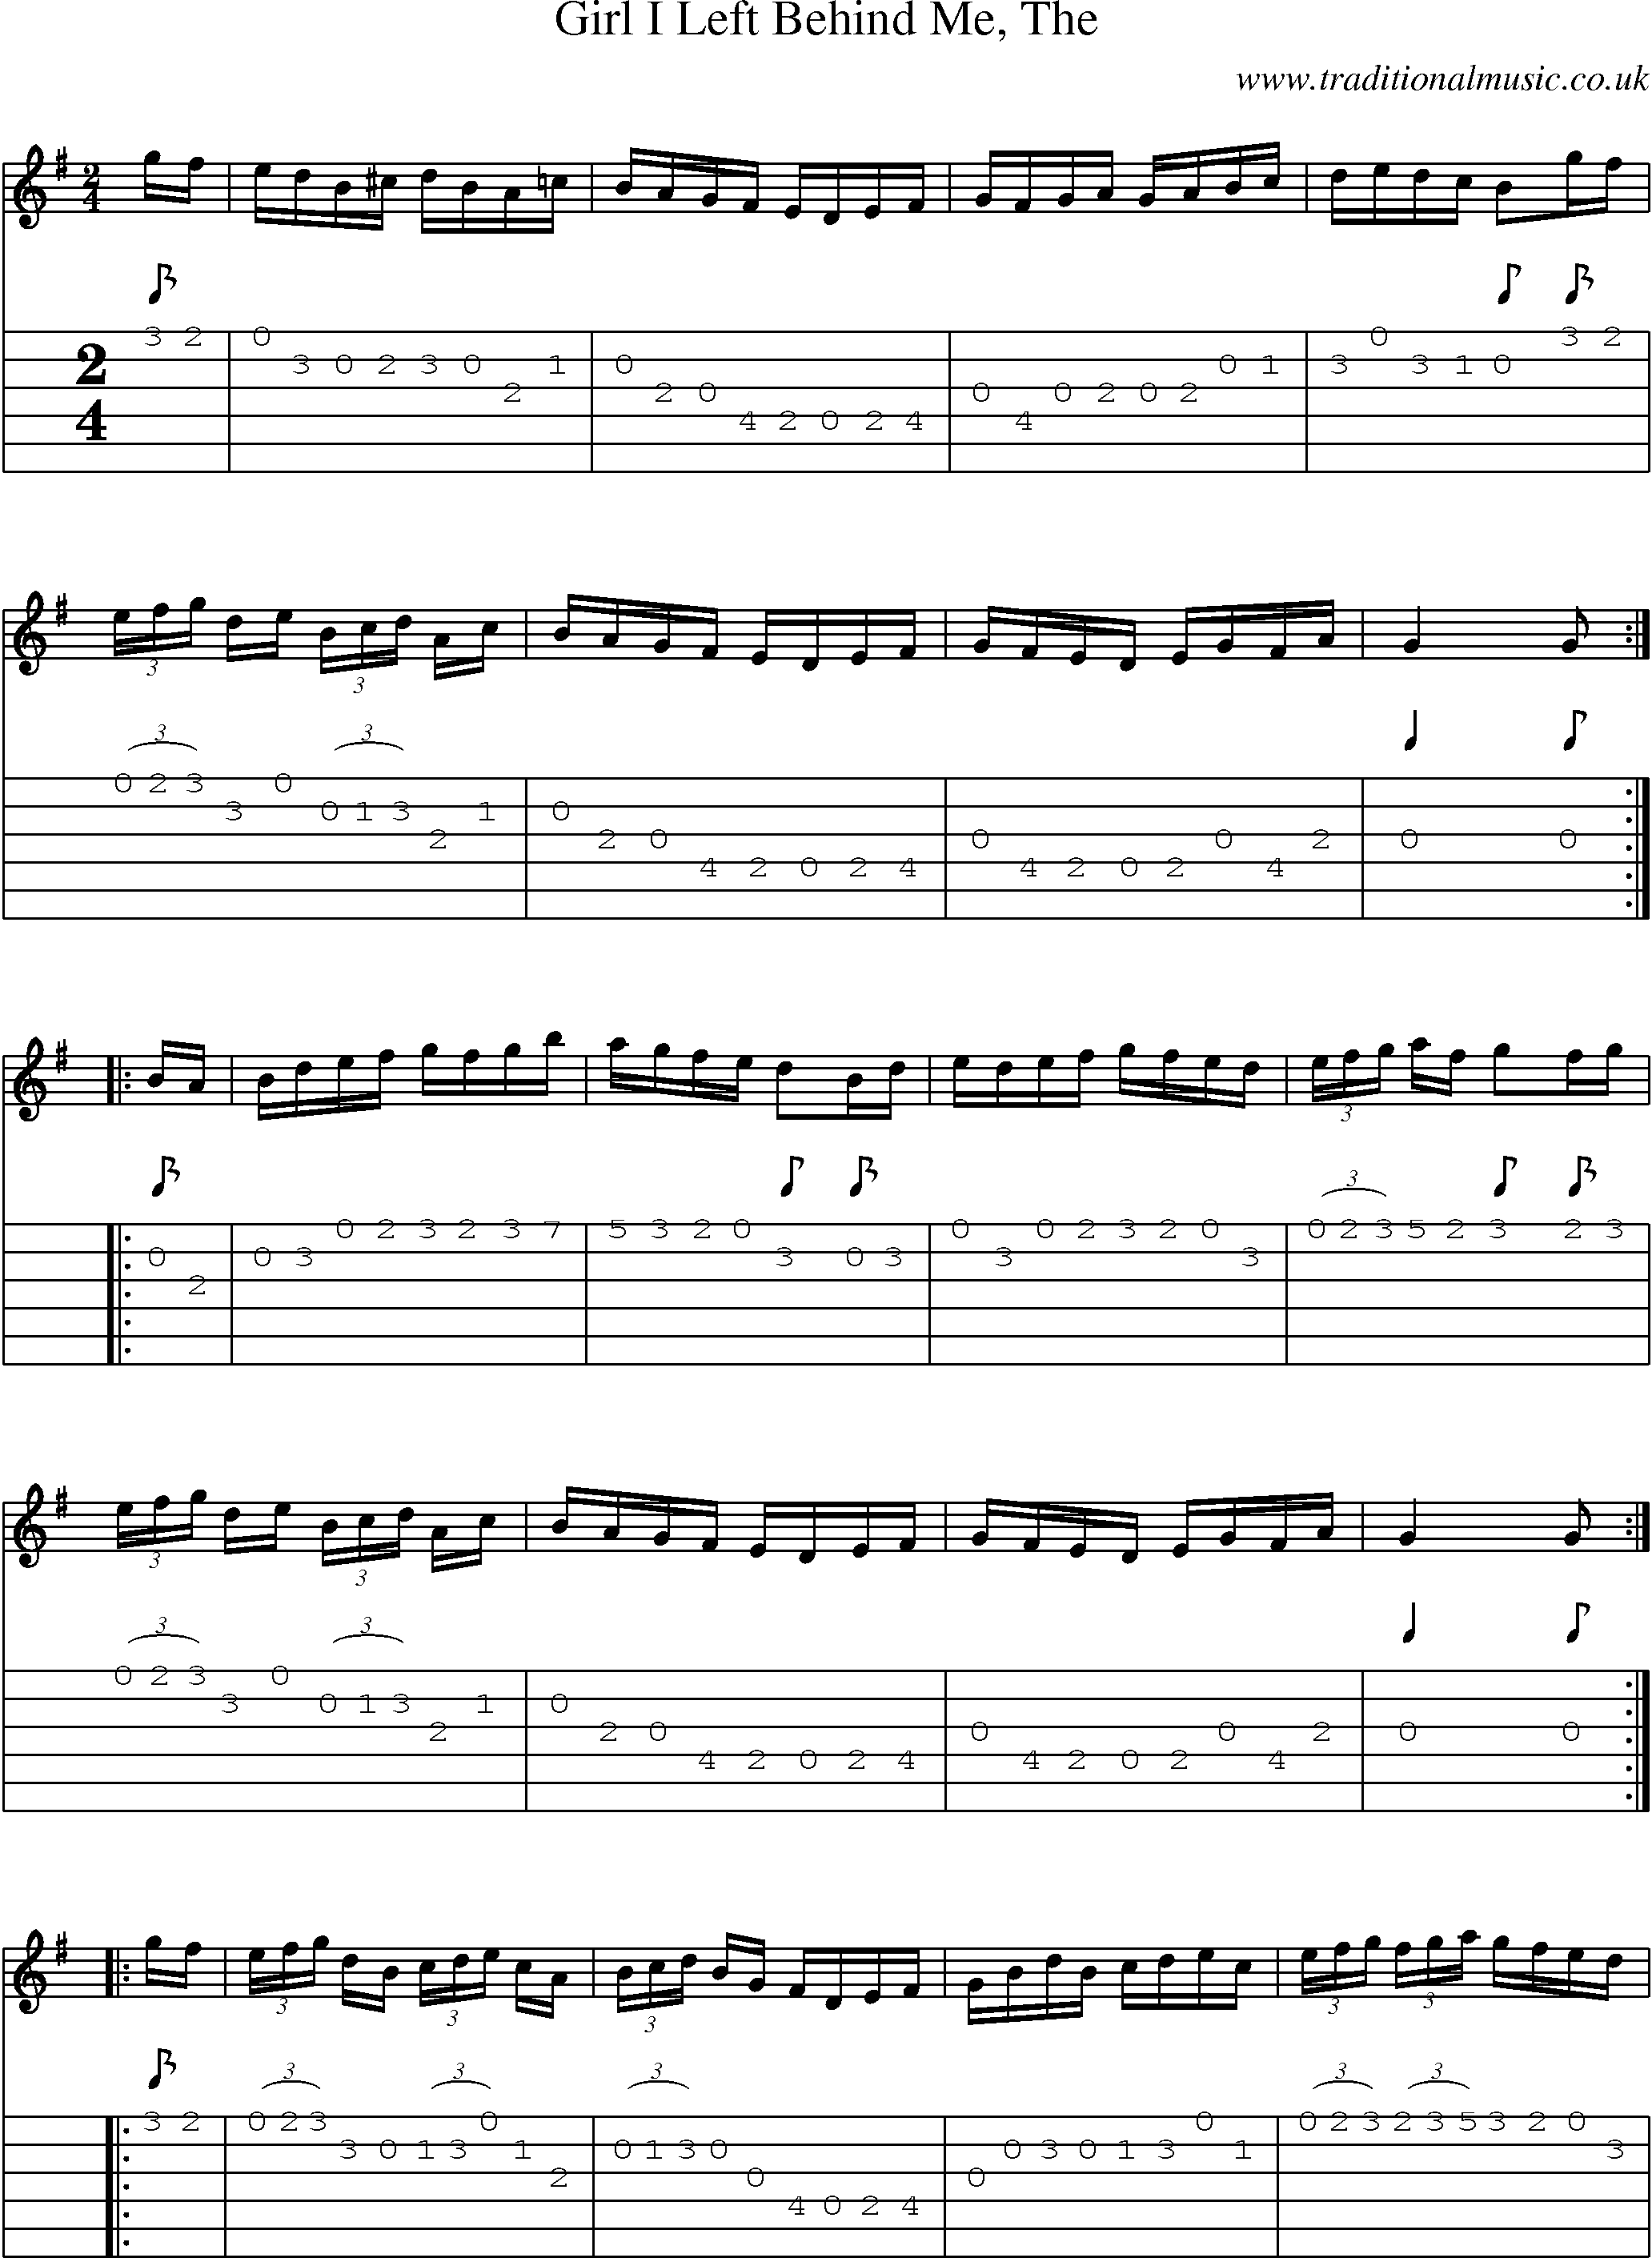 Music Score and Guitar Tabs for Girl I Left Behind Me 